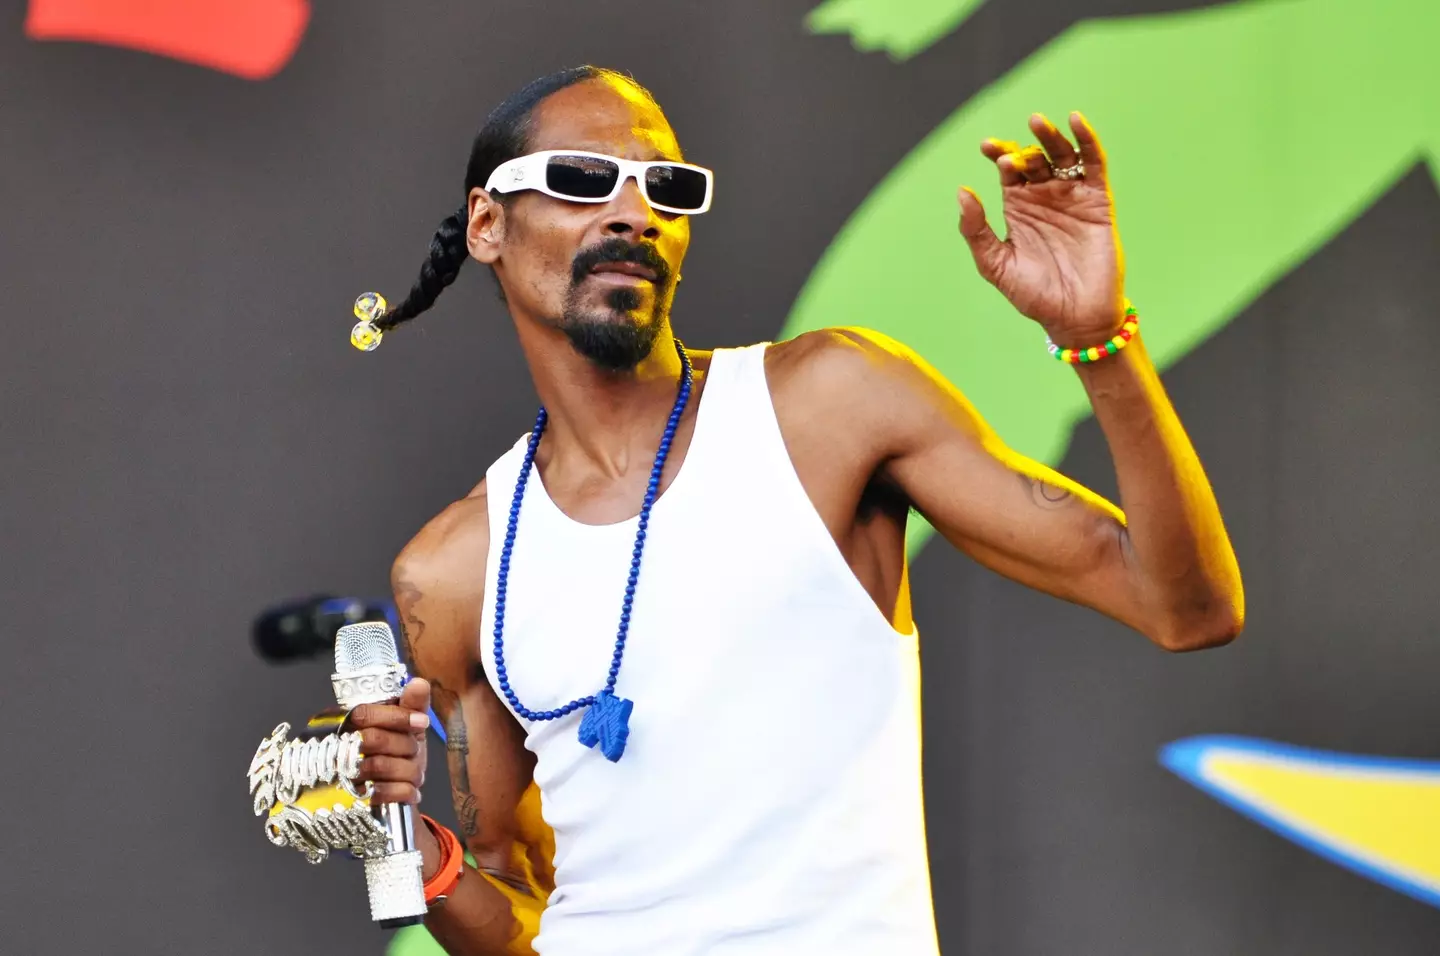 Snoop Dogg was accused of using Rastafarianism for his own self interest.